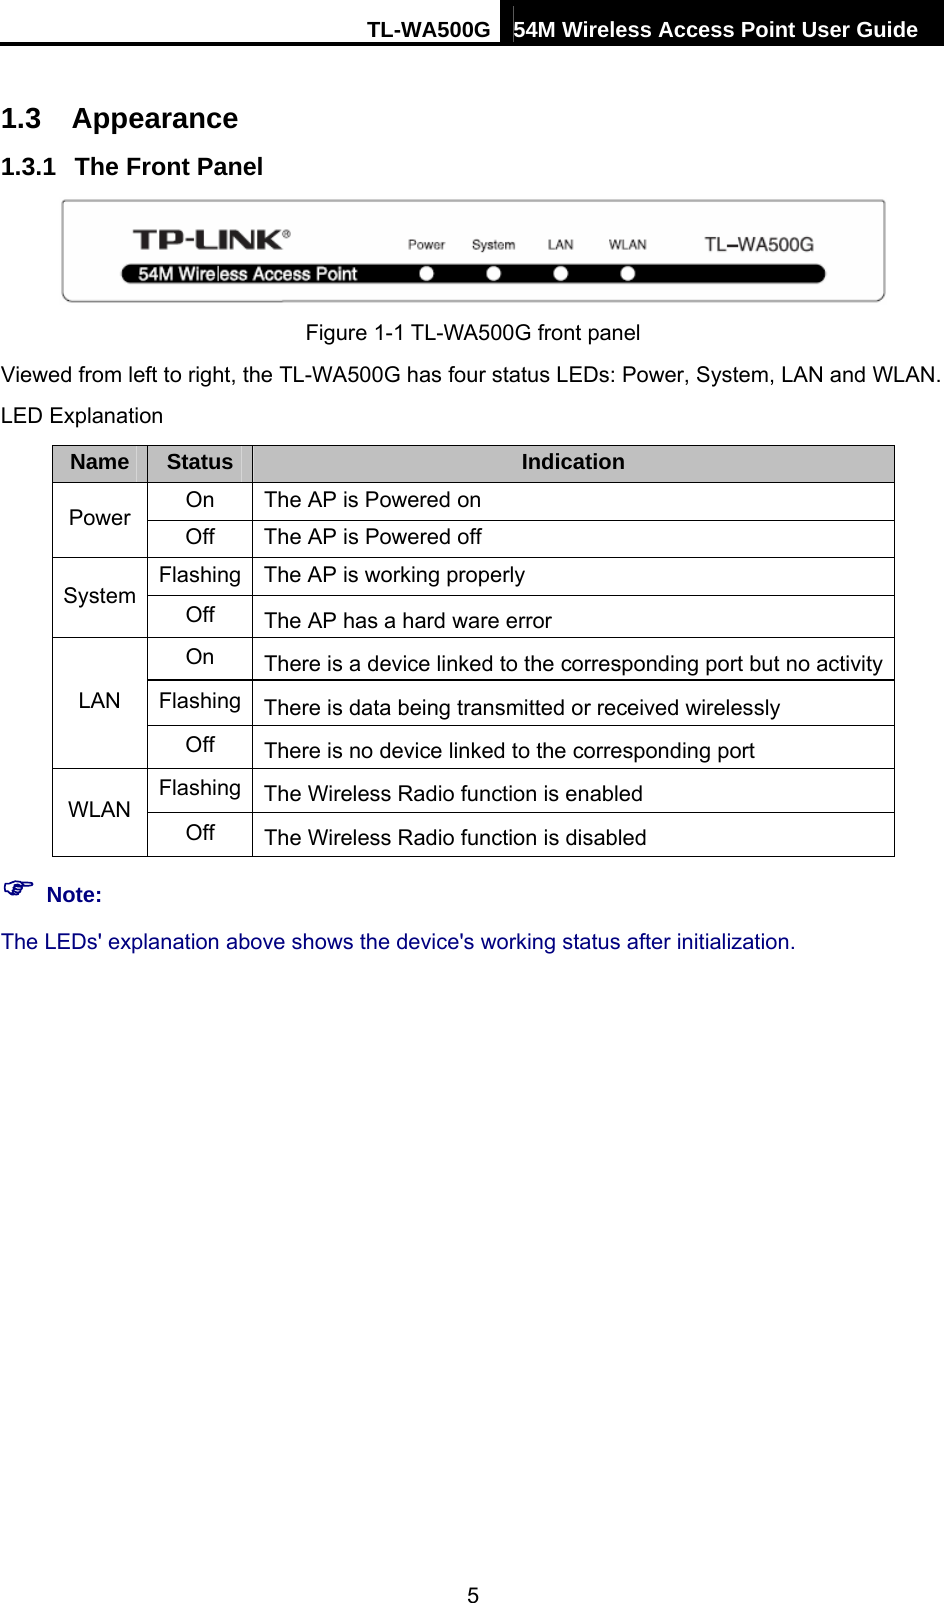 TL-WA500G 54M Wireless Access Point User Guide  1.3  Appearance 1.3.1  The Front Panel  Figure 1-1 TL-WA500G front panel Viewed from left to right, the TL-WA500G has four status LEDs: Power, System, LAN and WLAN. LED Explanation Name  Status Indication On  The AP is Powered on Power  Off  The AP is Powered off Flashing  The AP is working properly System  Off  The AP has a hard ware error On  There is a device linked to the corresponding port but no activityFlashing  There is data being transmitted or received wirelessly LAN Off  There is no device linked to the corresponding port Flashing  The Wireless Radio function is enabled WLAN  Off  The Wireless Radio function is disabled ) Note: The LEDs&apos; explanation above shows the device&apos;s working status after initialization. 5 